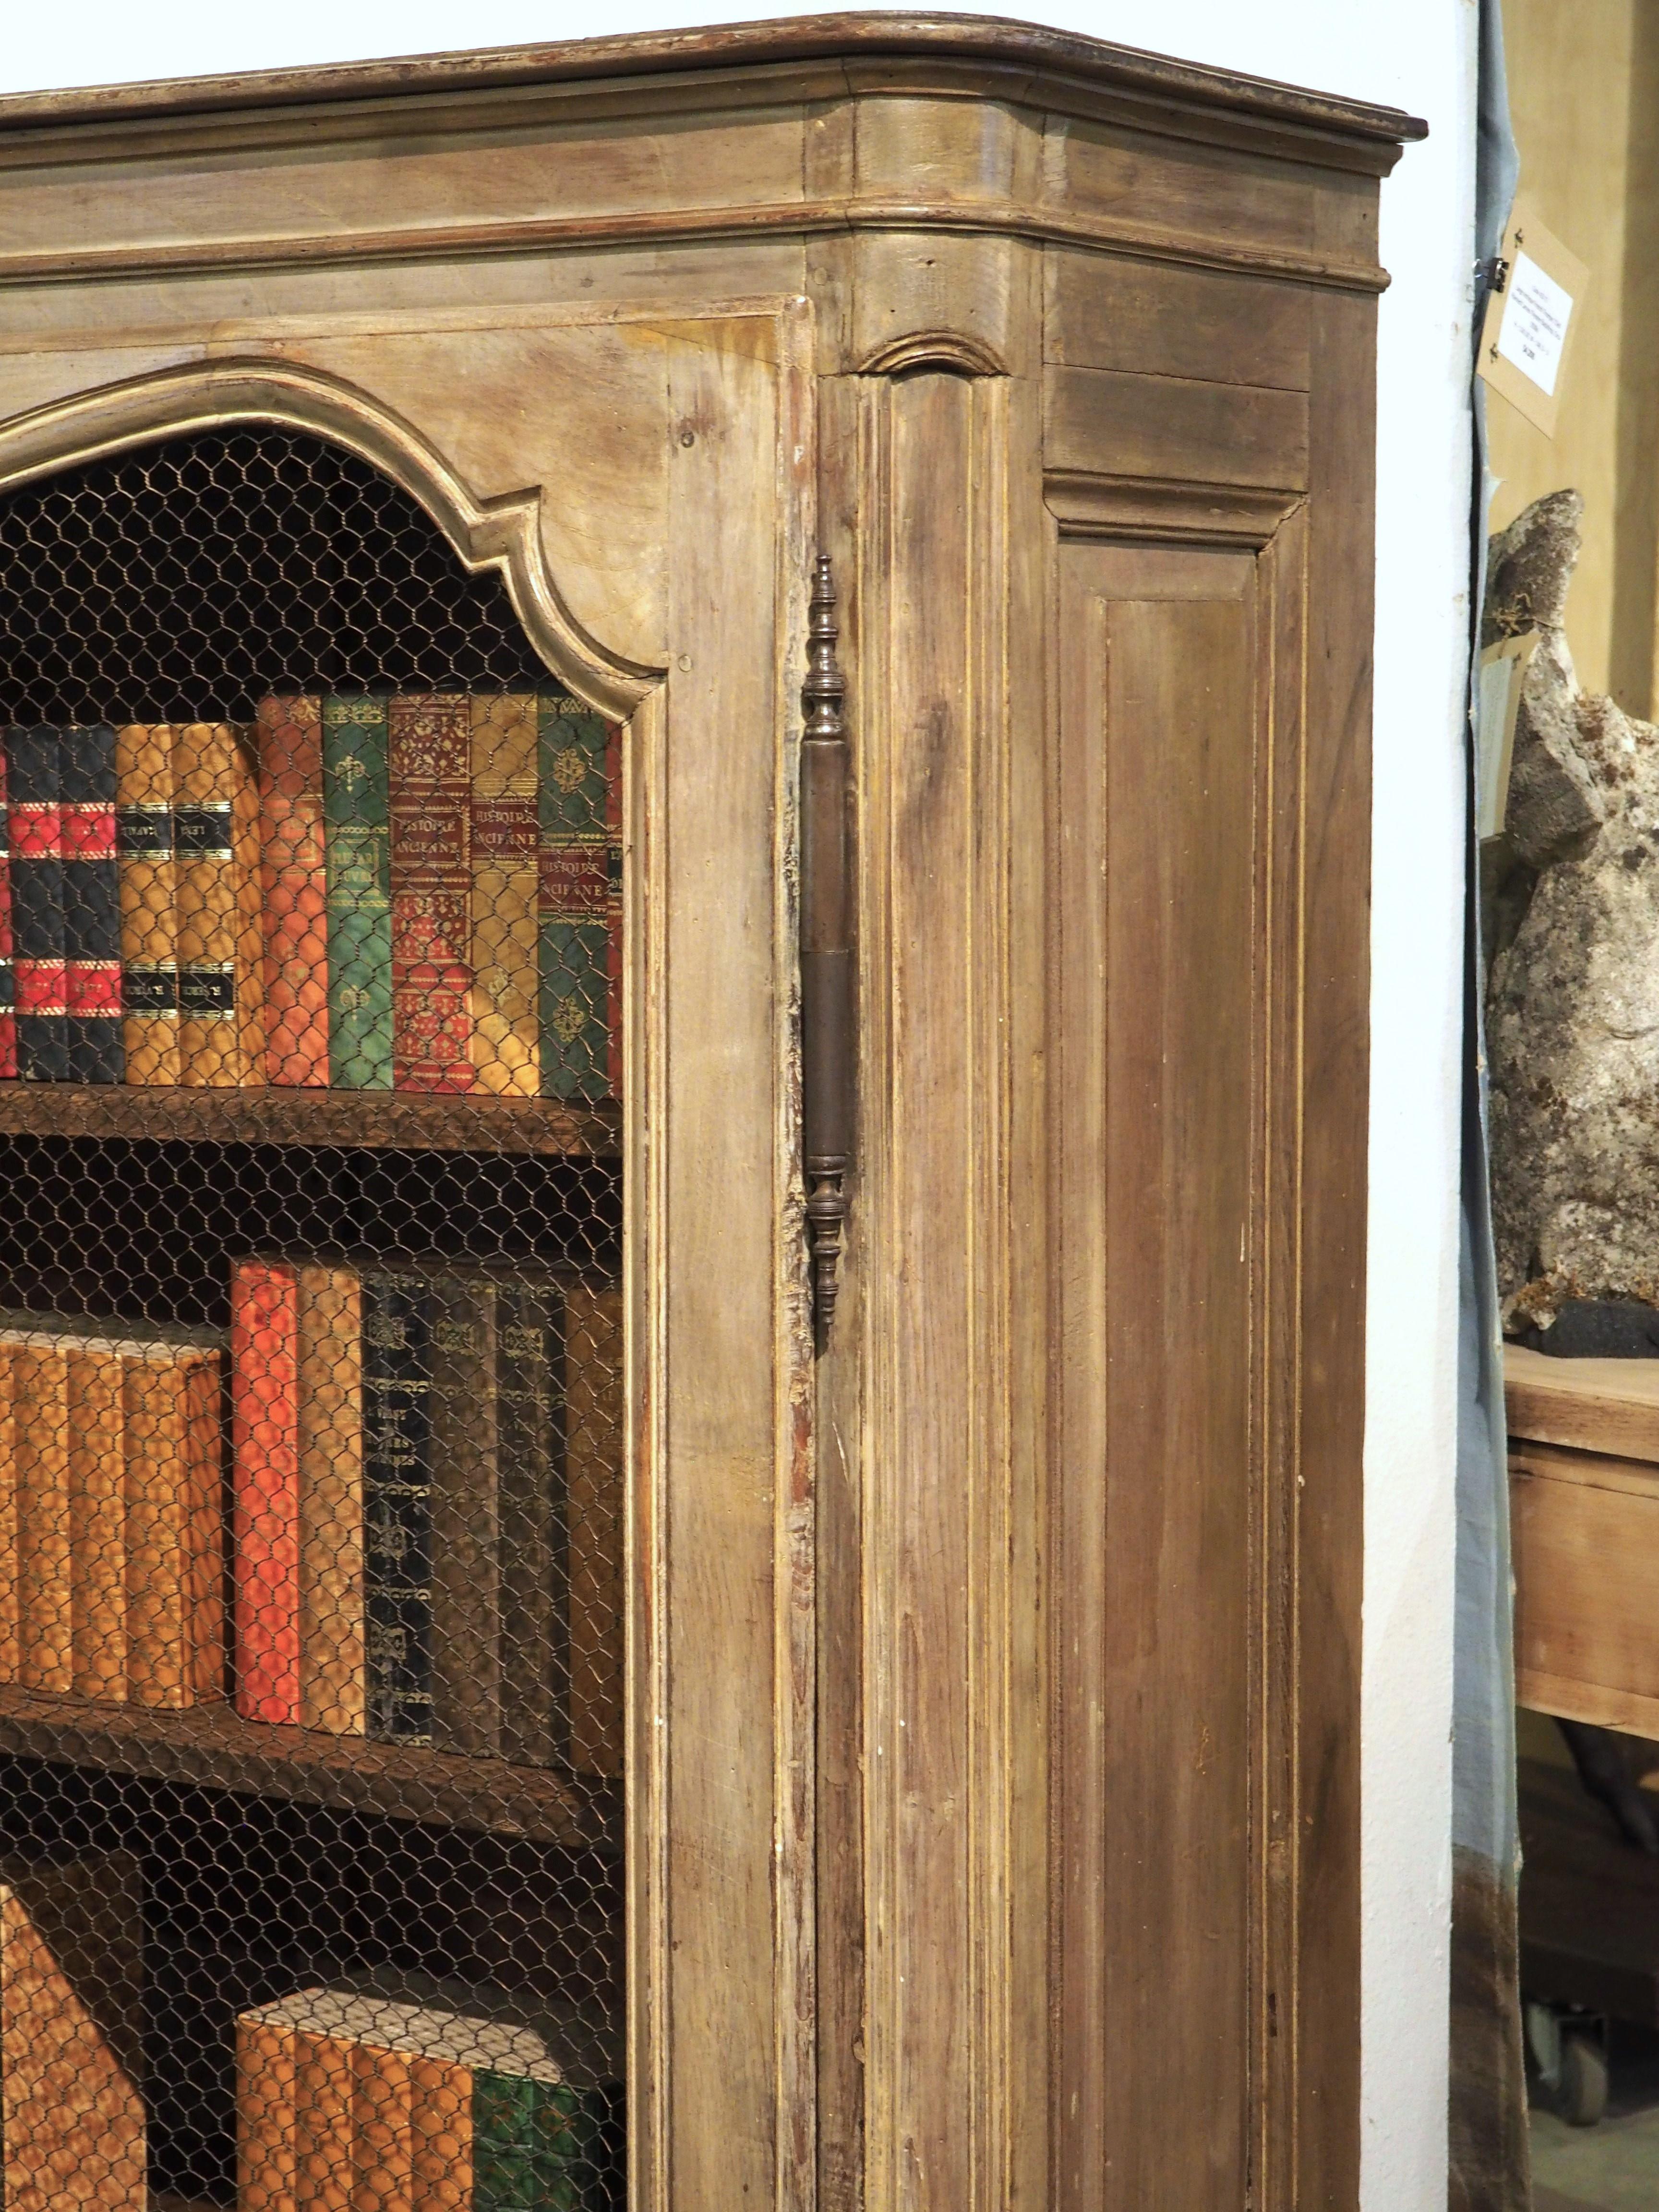 Early 19th Century French Bibliotheque Cabinet with Wire Mesh Door Panels 2